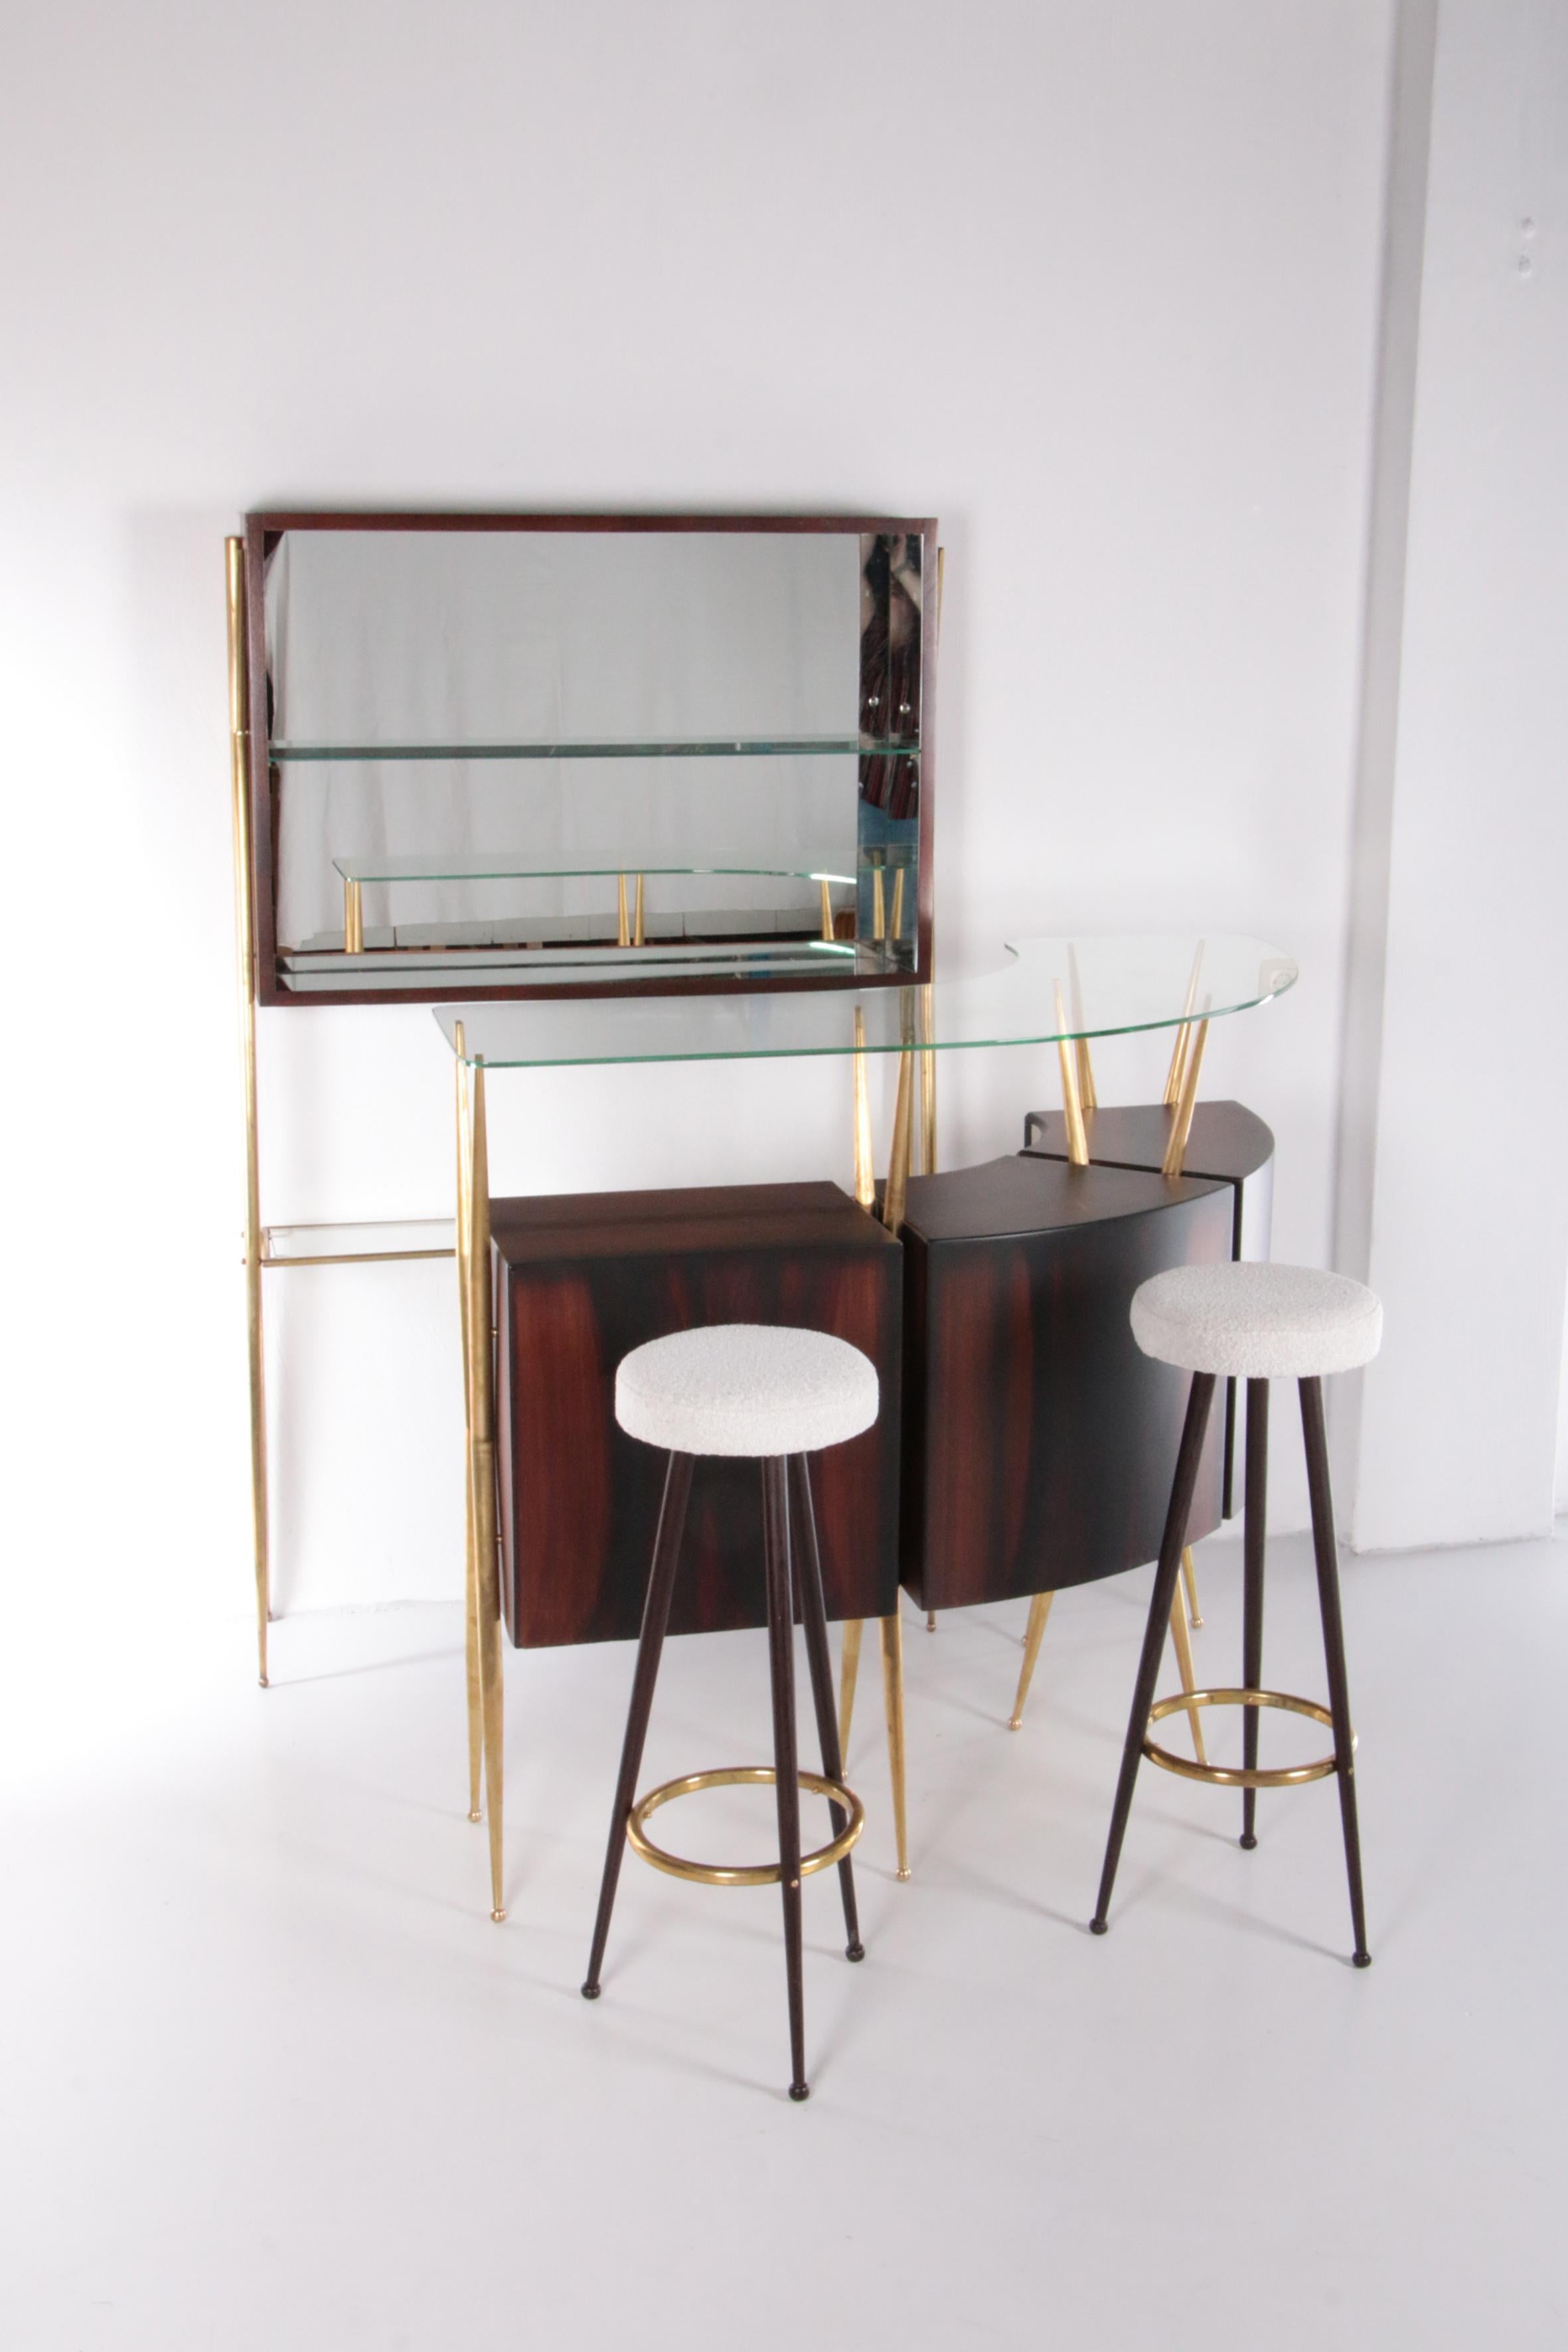 Italian Mahogany bar design by Cesare Lacca 1956 a complete set.

1950s Italian dry bar or home bar with bar cabinet and stools.

Italian Mahogany bar design by Cesare Lacca 1956 a complete set.

This stylish mid-century bar has a beautiful